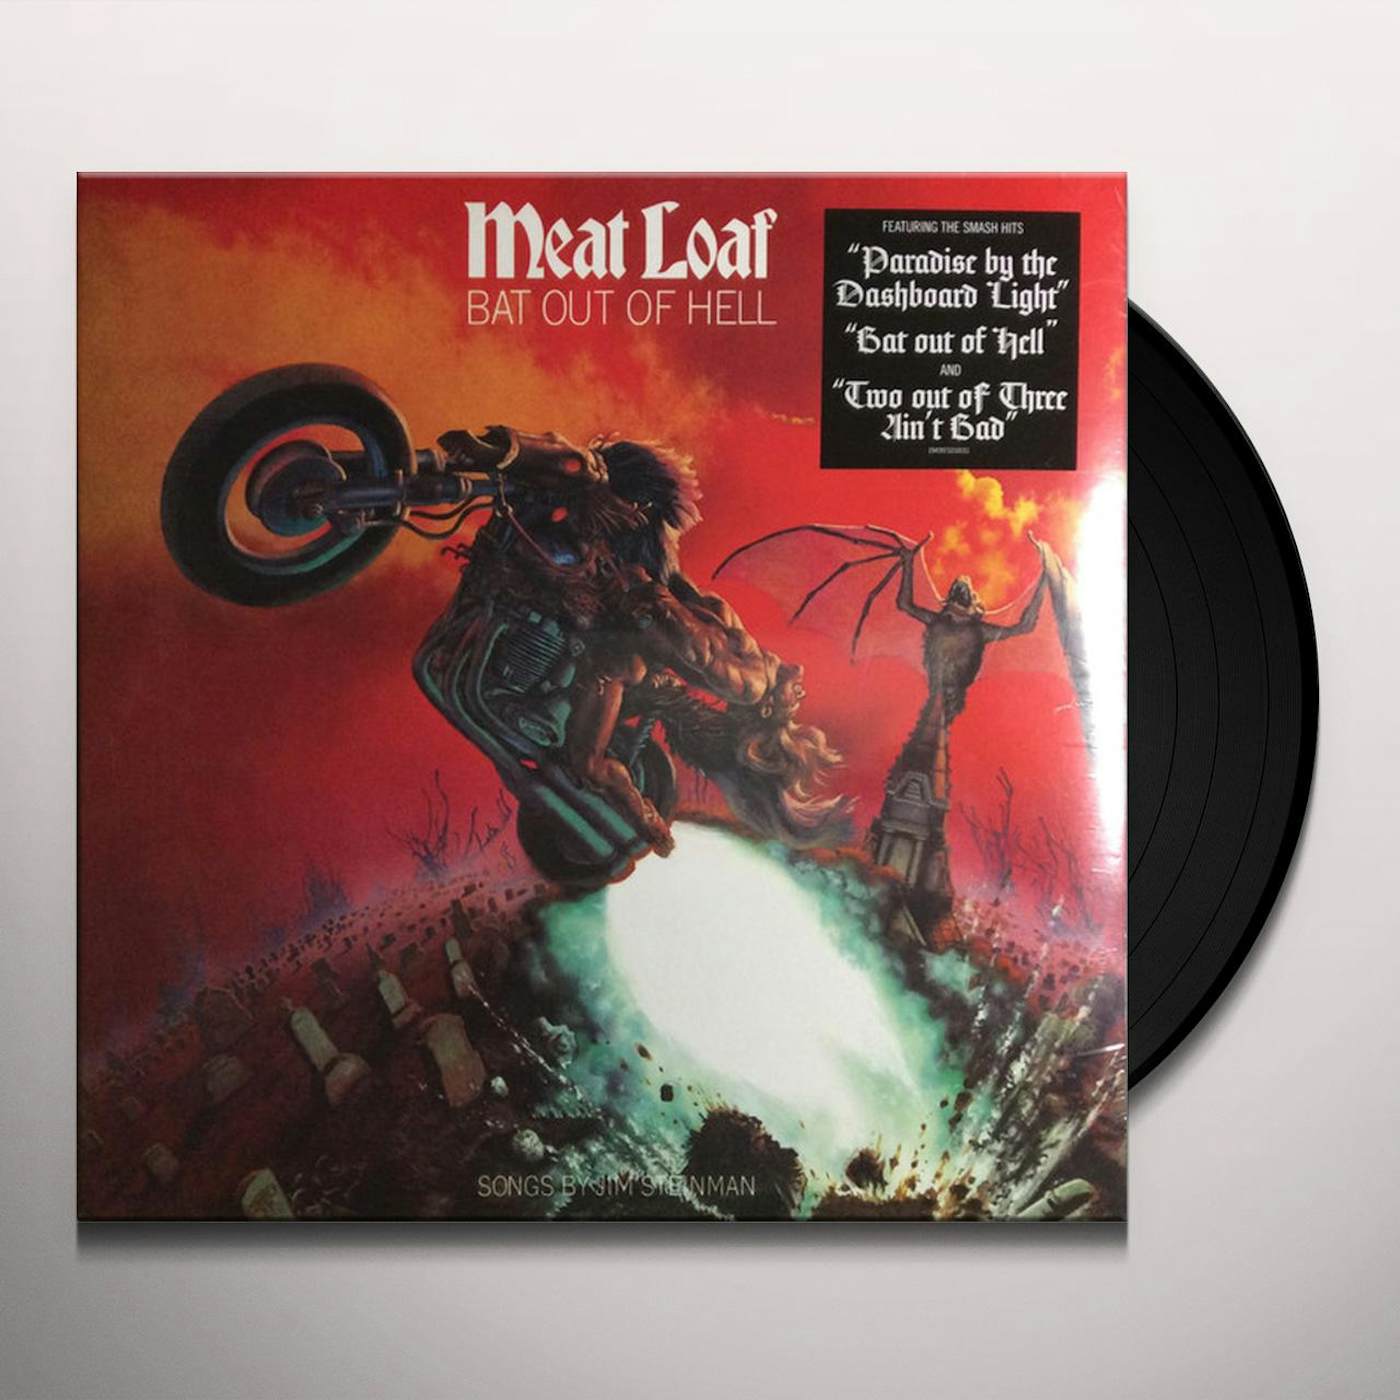 Meat Loaf BAT OUT OF HELL (150G) Vinyl Record